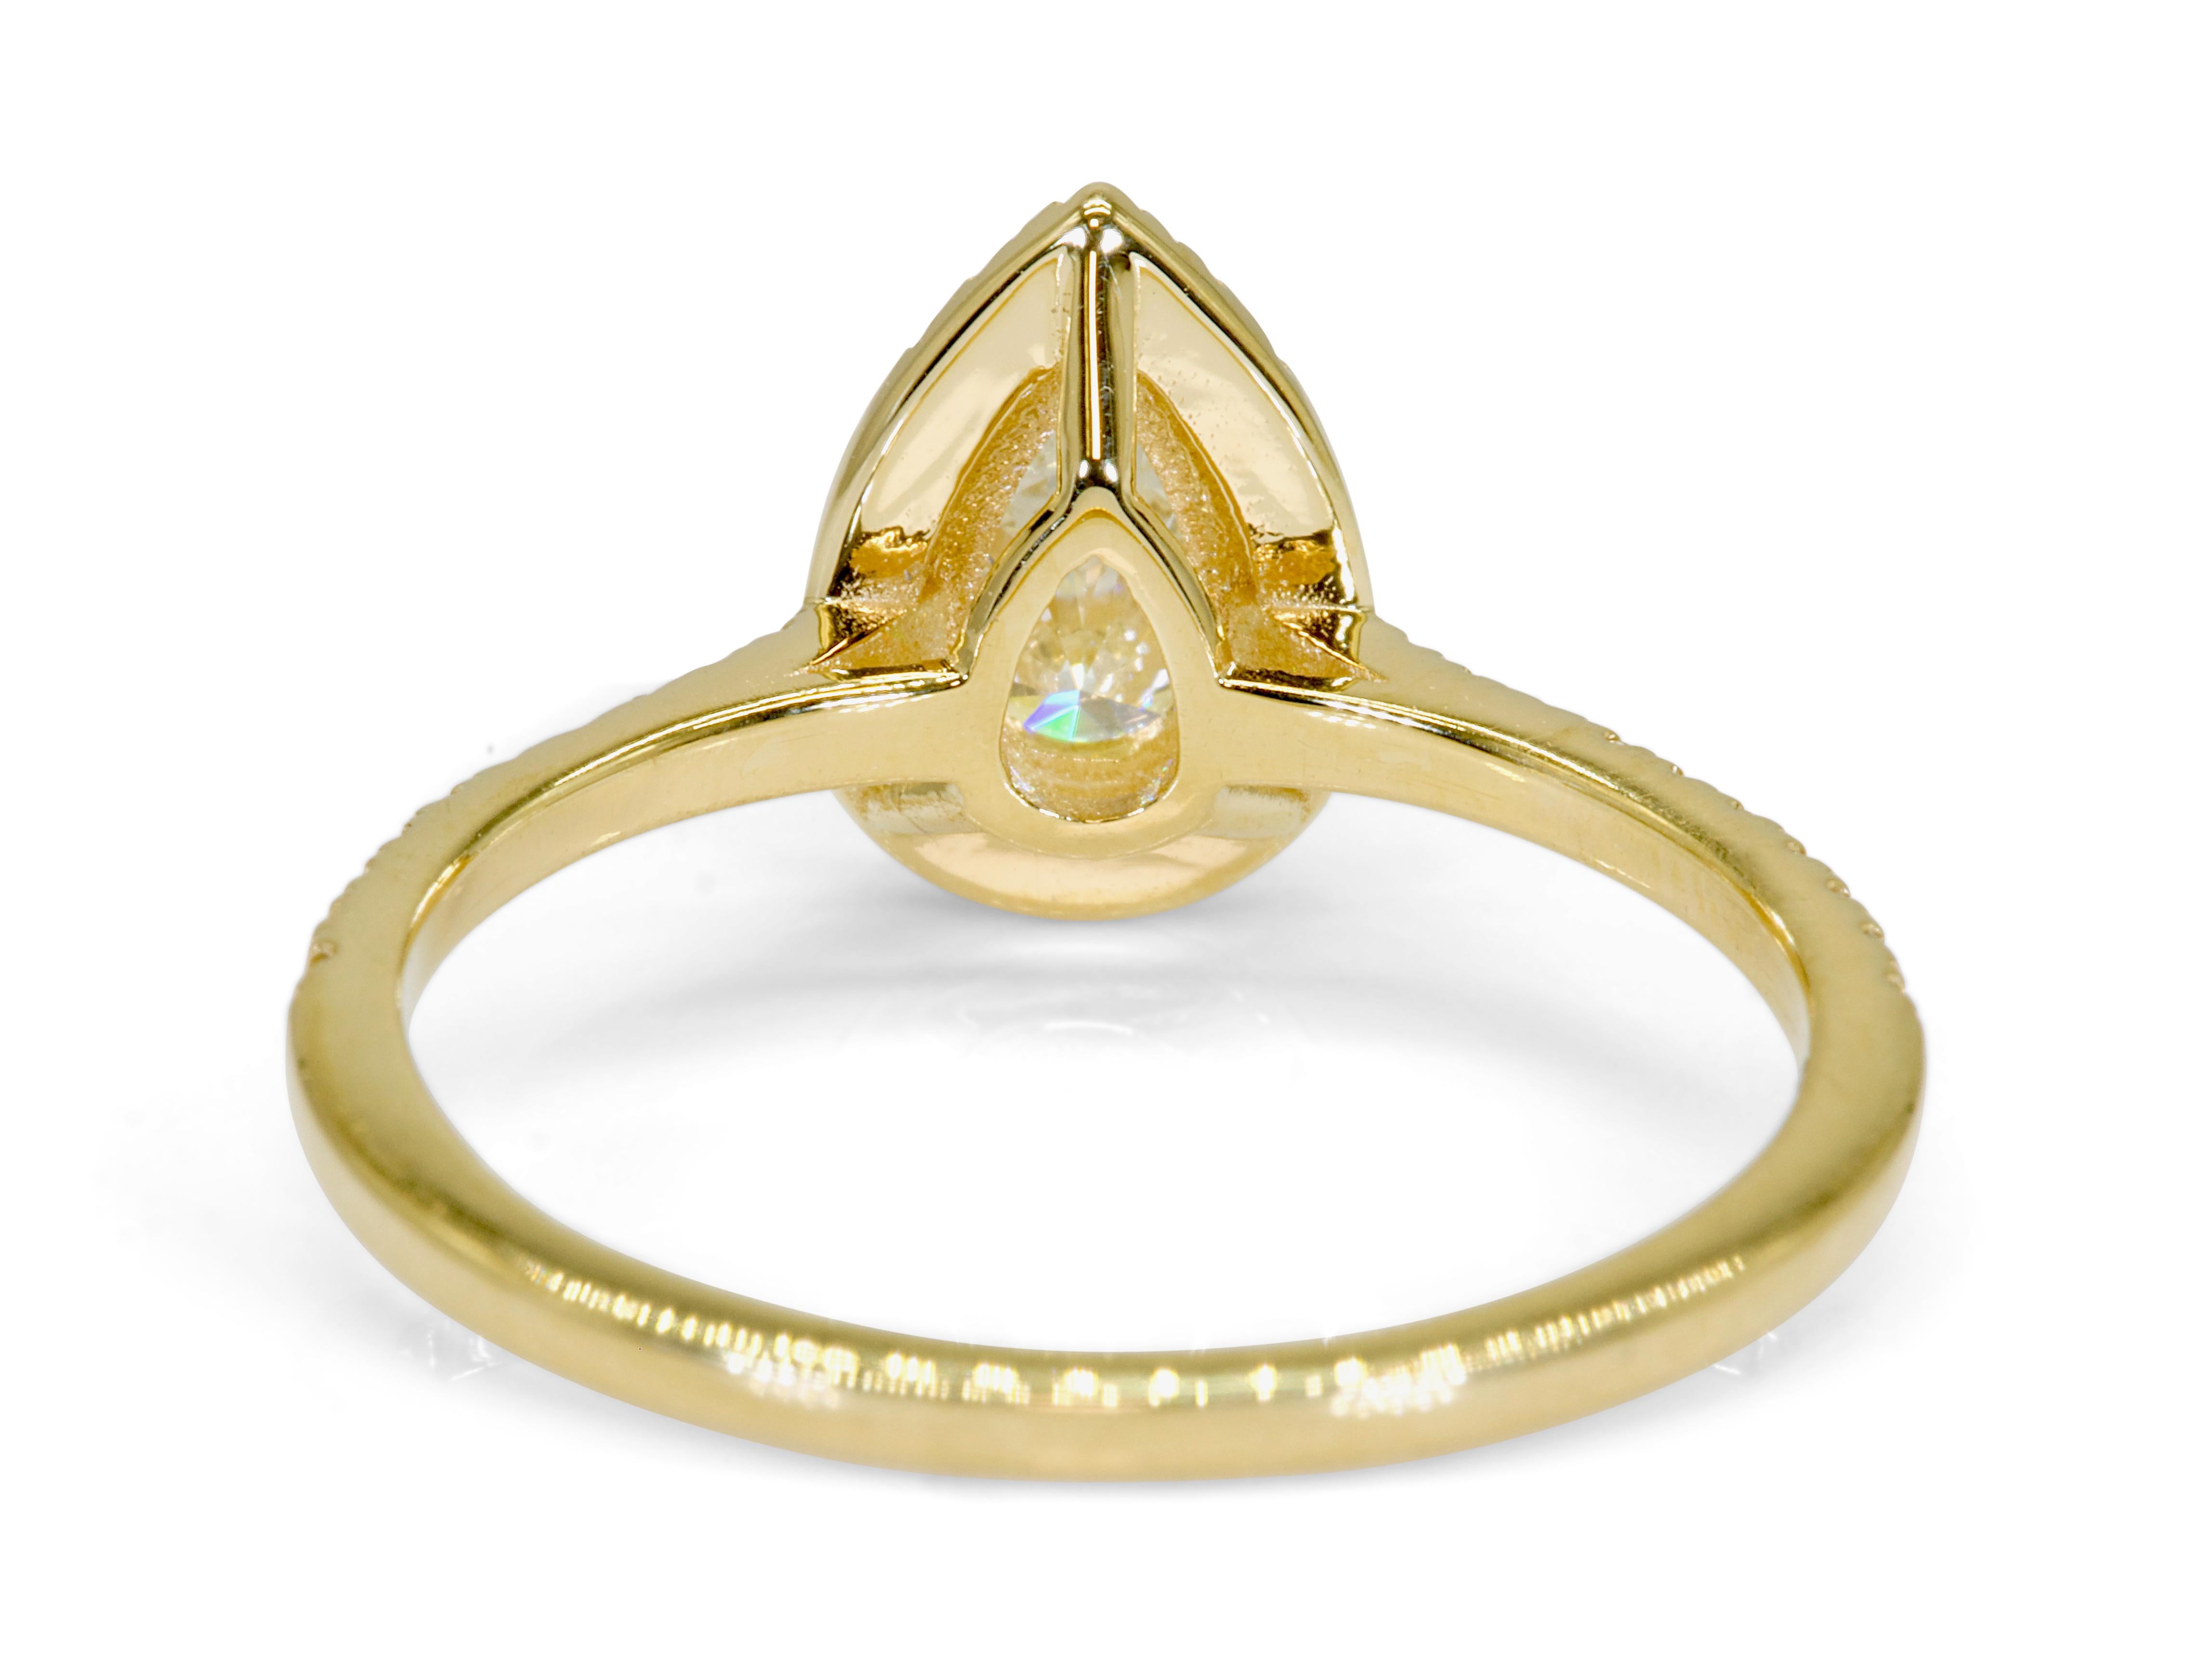 Dazzling 2.66ct Pear-Shaped Diamond Halo Ring in 18k Yellow Gold - GIA Certified For Sale 1